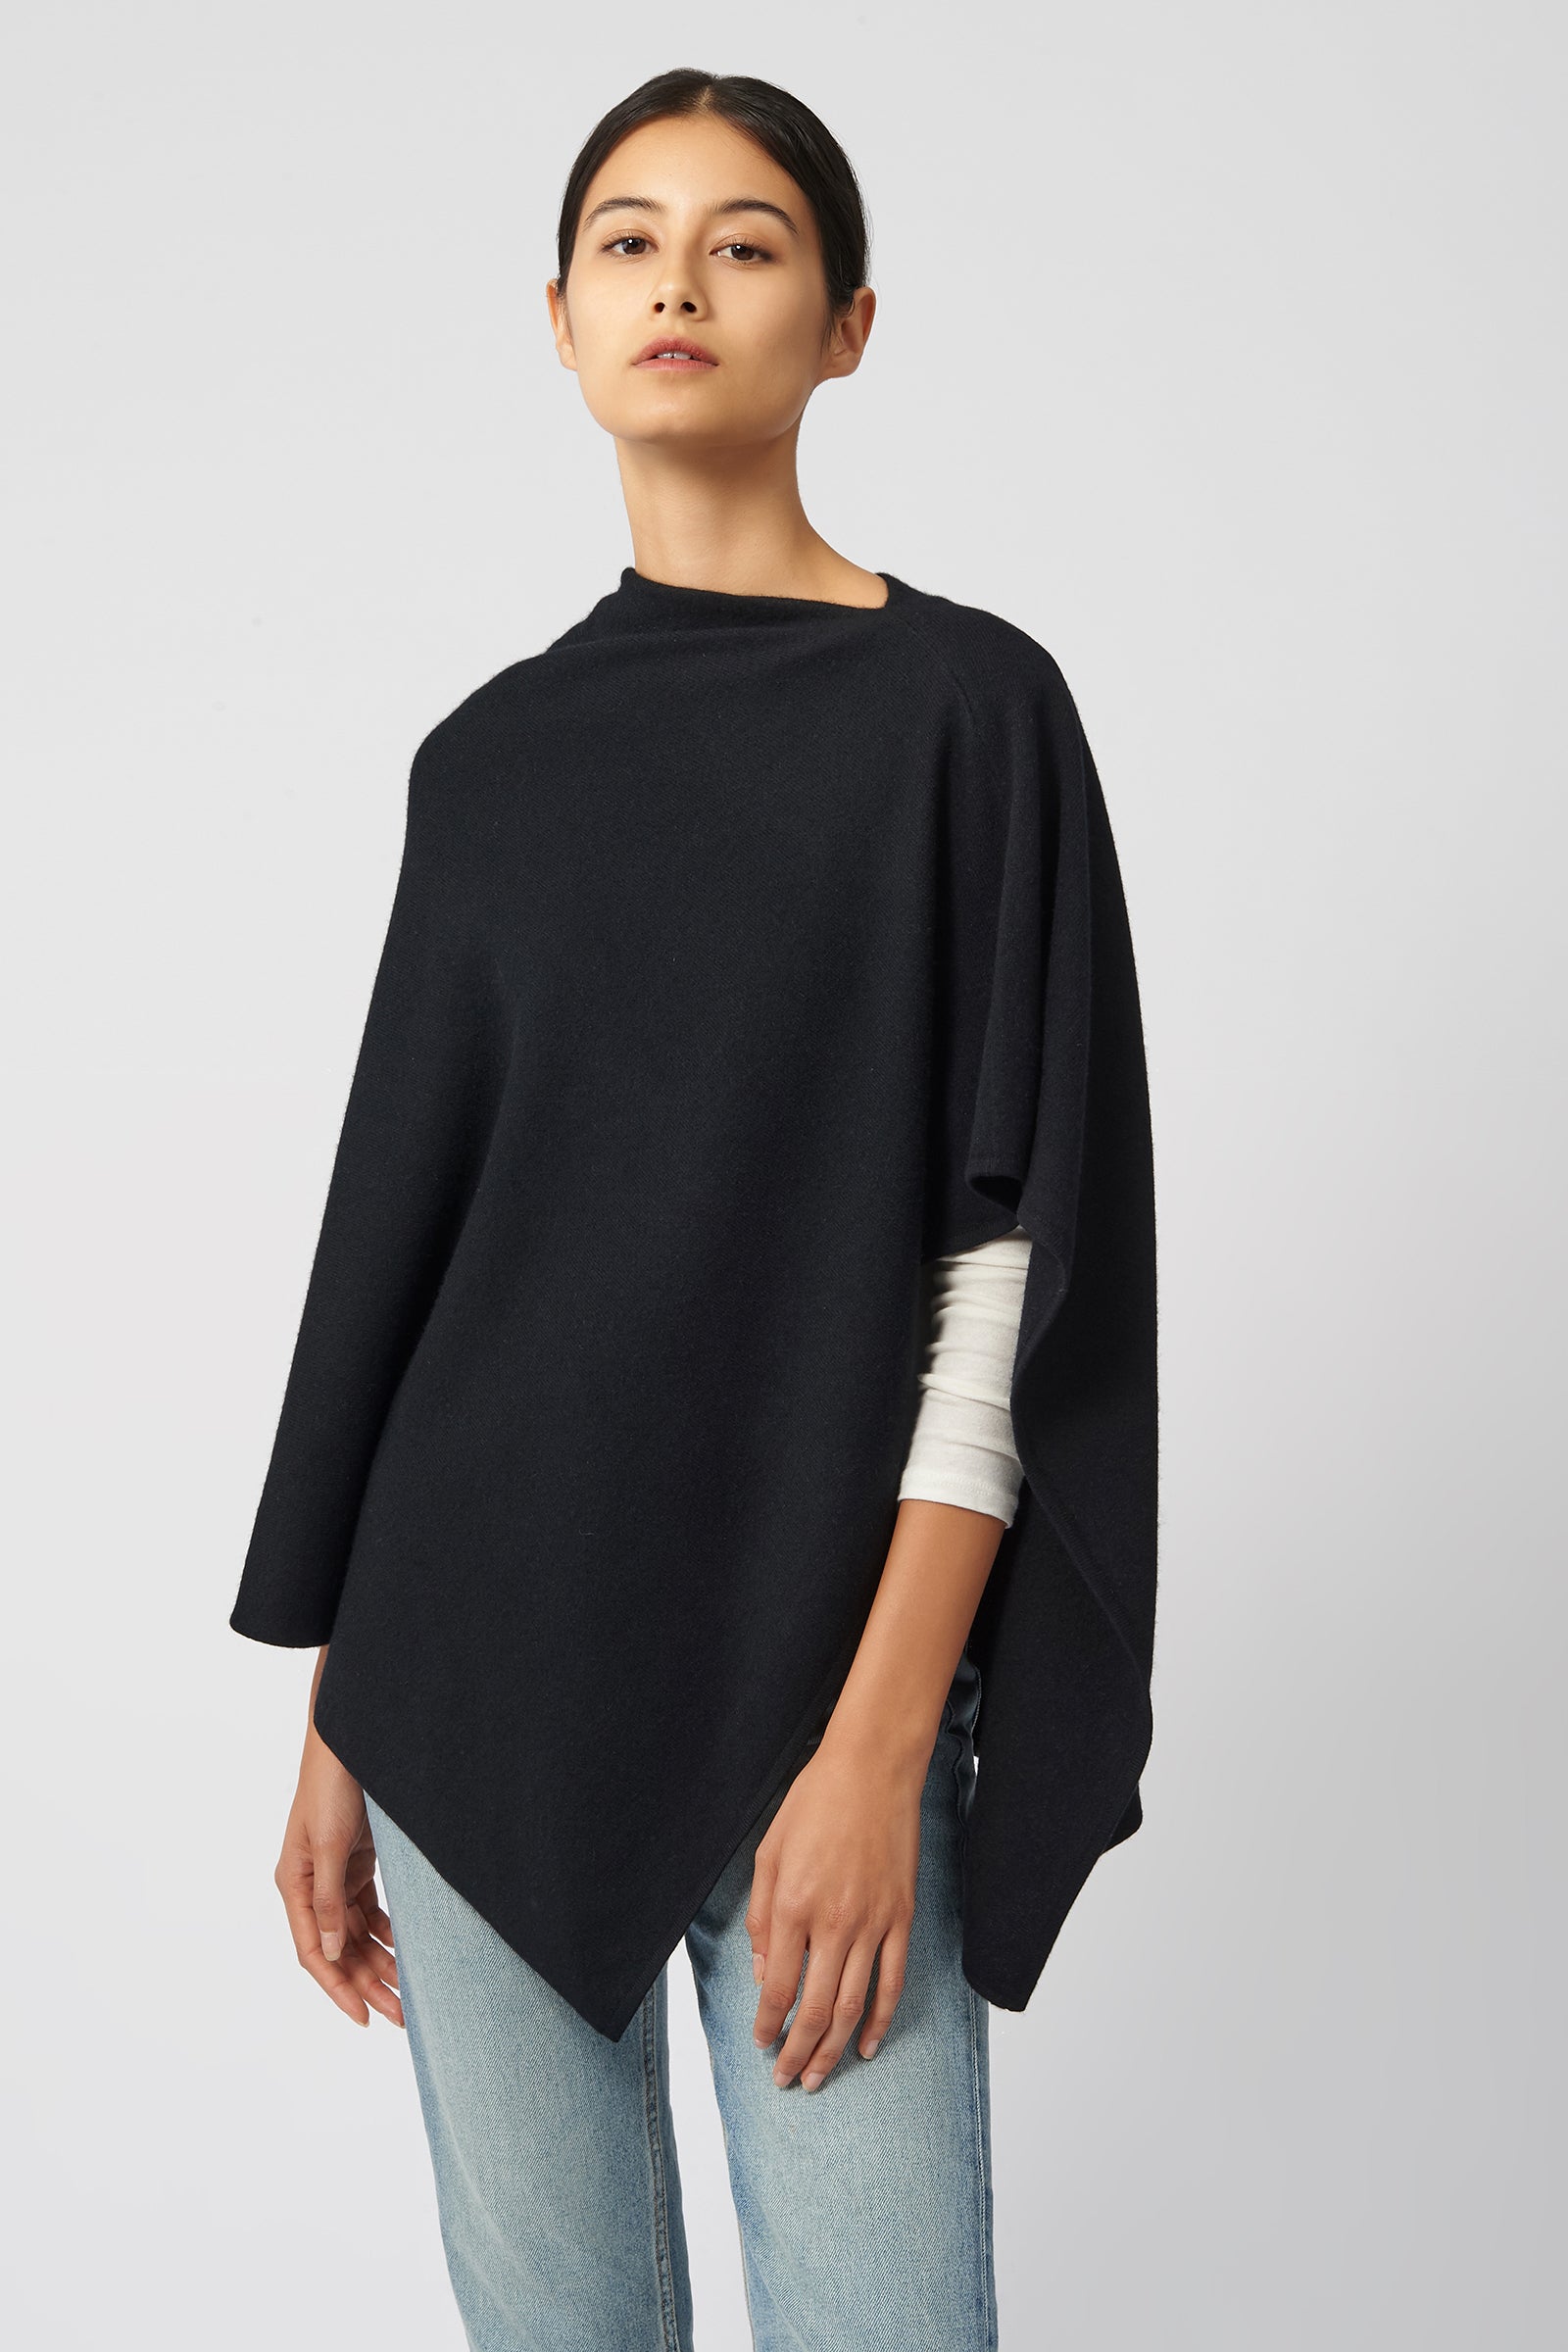 Kal Rieman Cashmere Poncho in Black on Model Front View